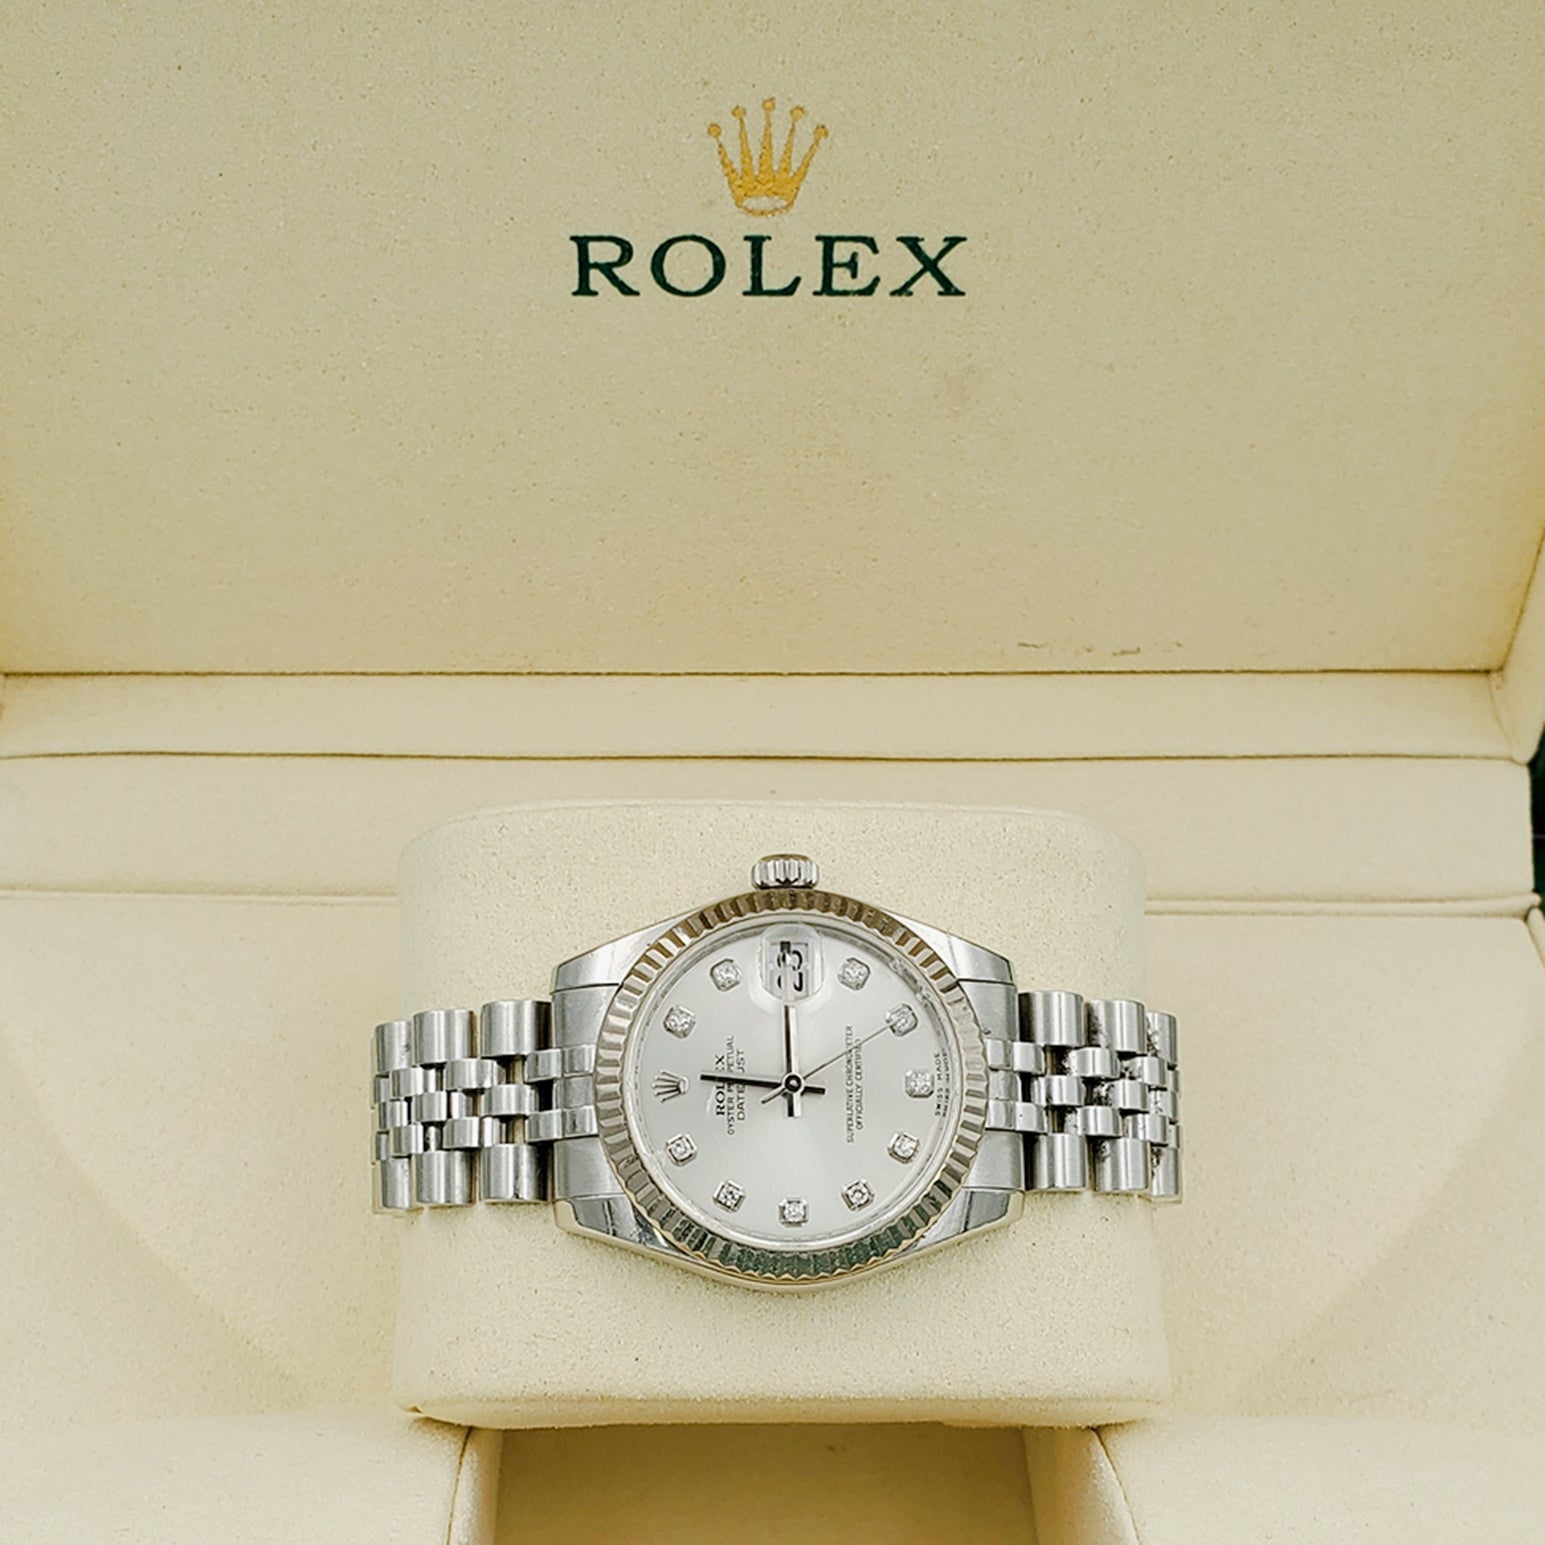 Unisex Midsize Rolex DateJust 31mm Stainless Steel Watch with Silver Diamond Dial and Fluted Bezel. (Pre-Owned)